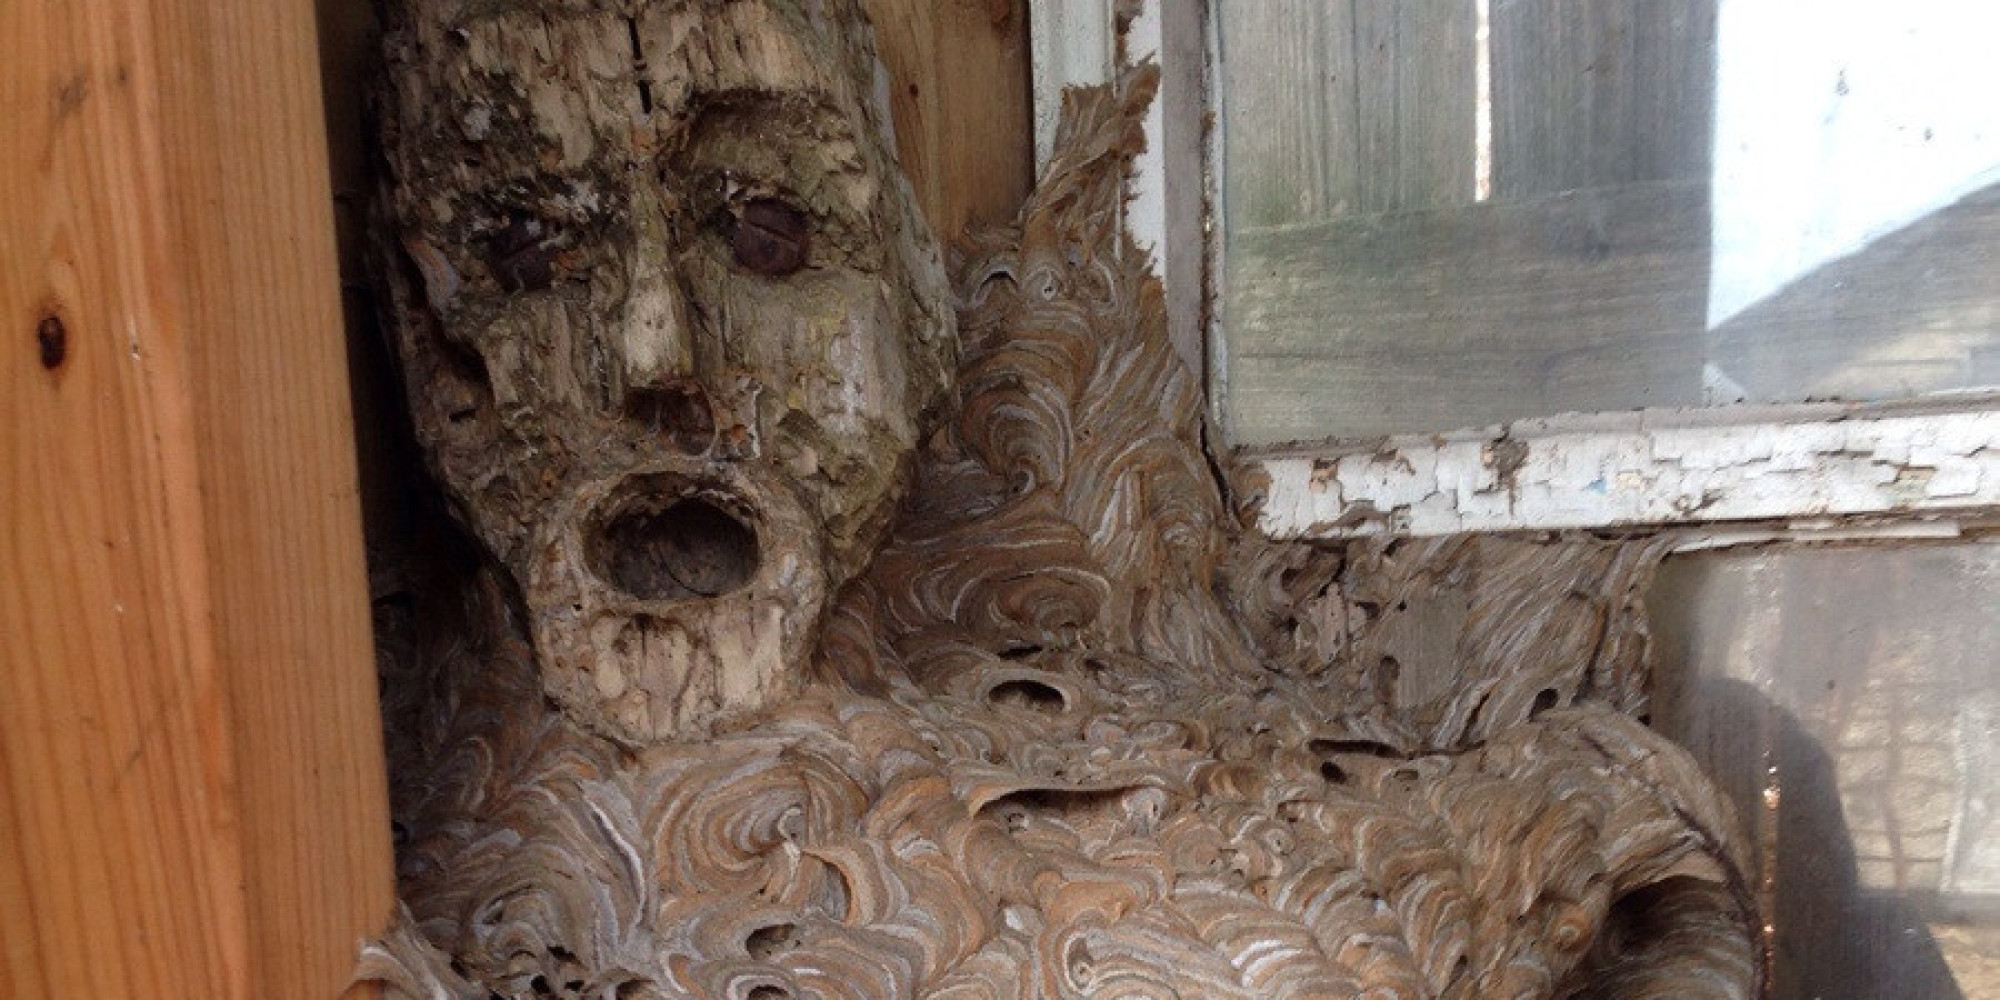 Sorry This Hornets Nest With A Face Is Going To Haunt Your